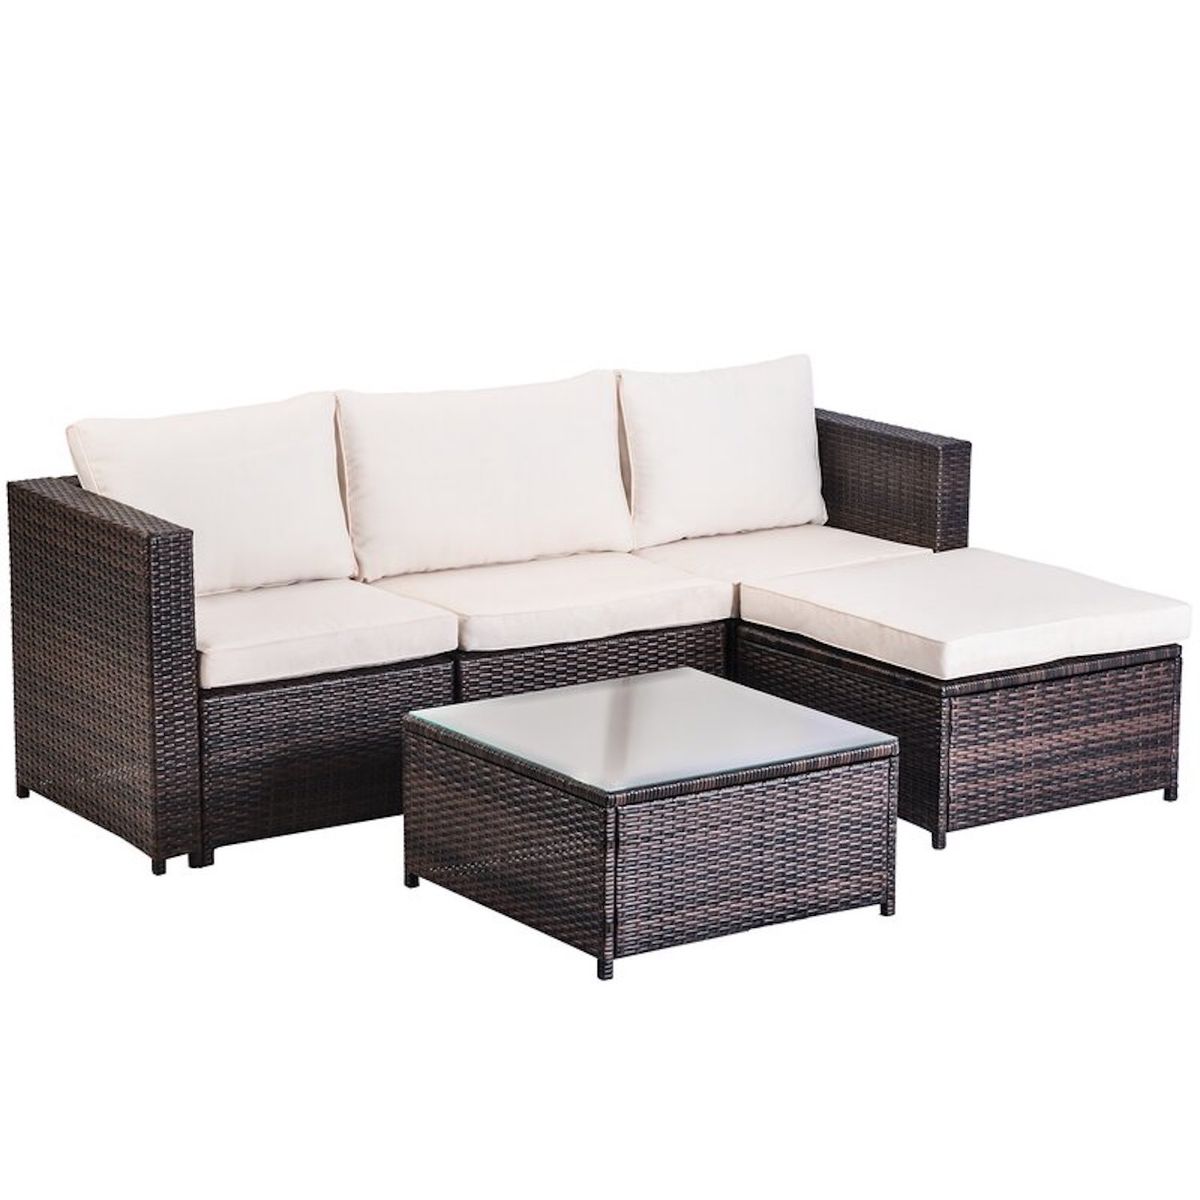 Way Day Outdoor Furniture Sale